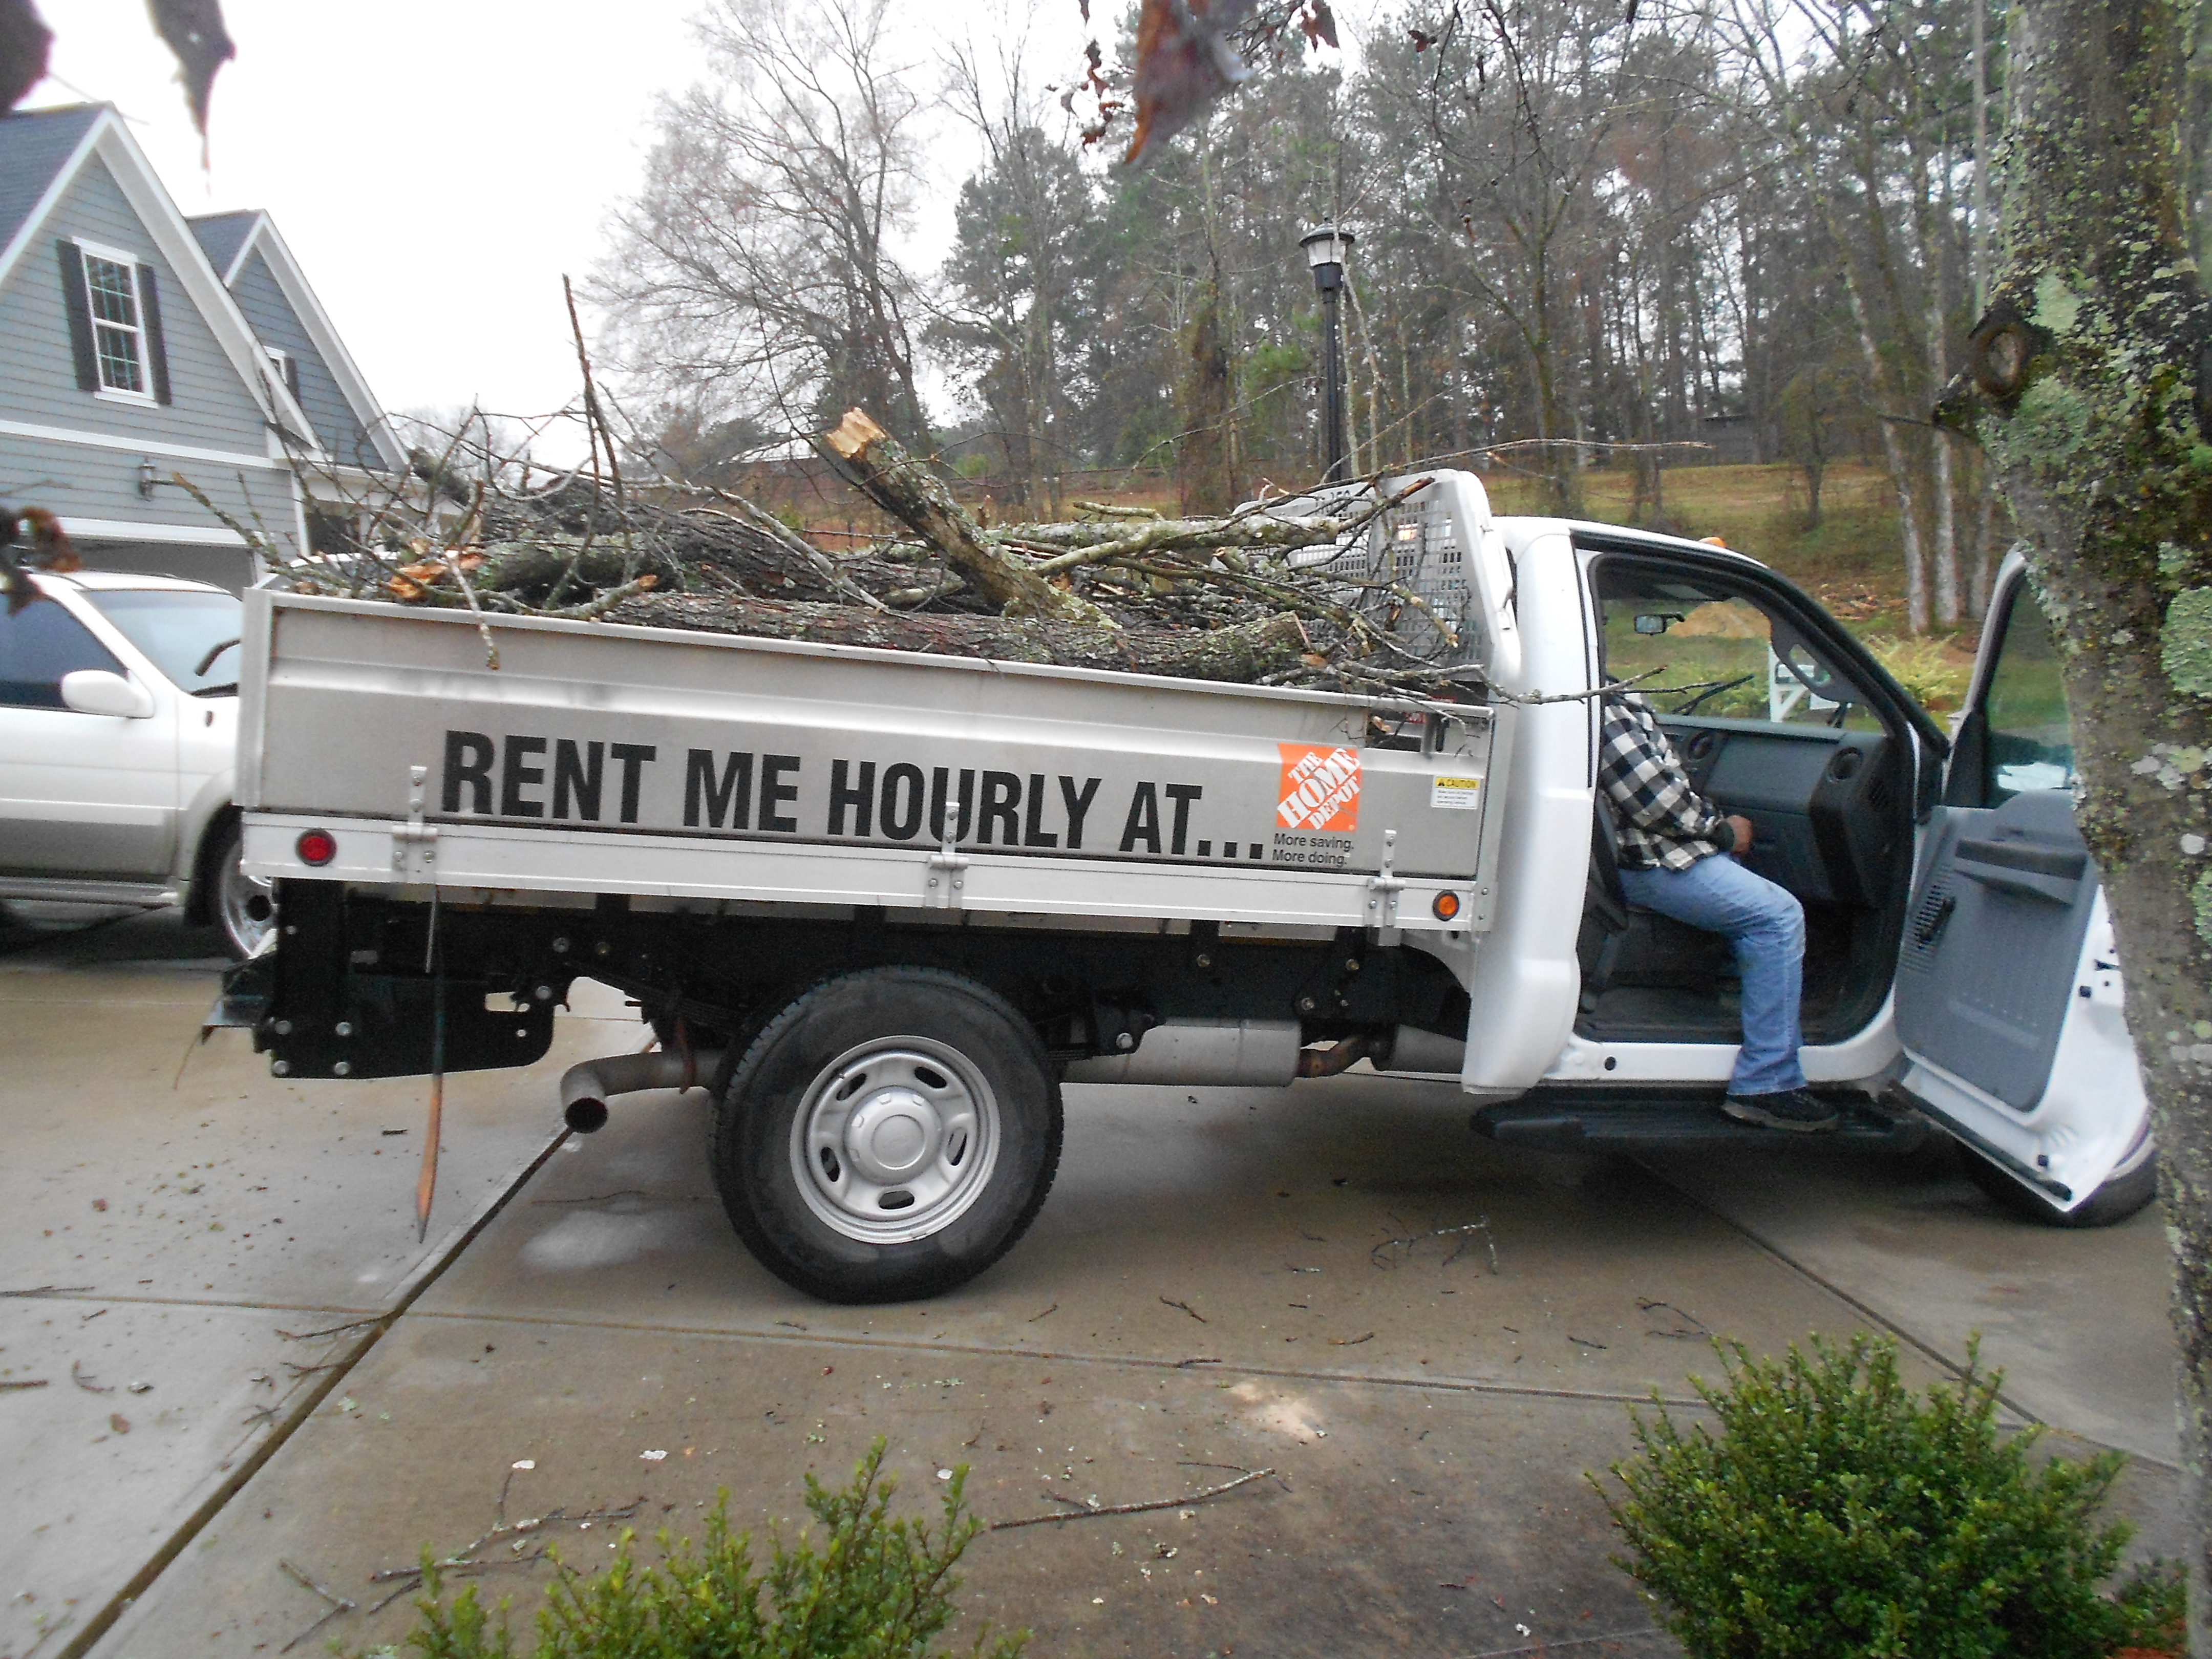 Can you rent home depot truck to dump stuffs at a landfill 